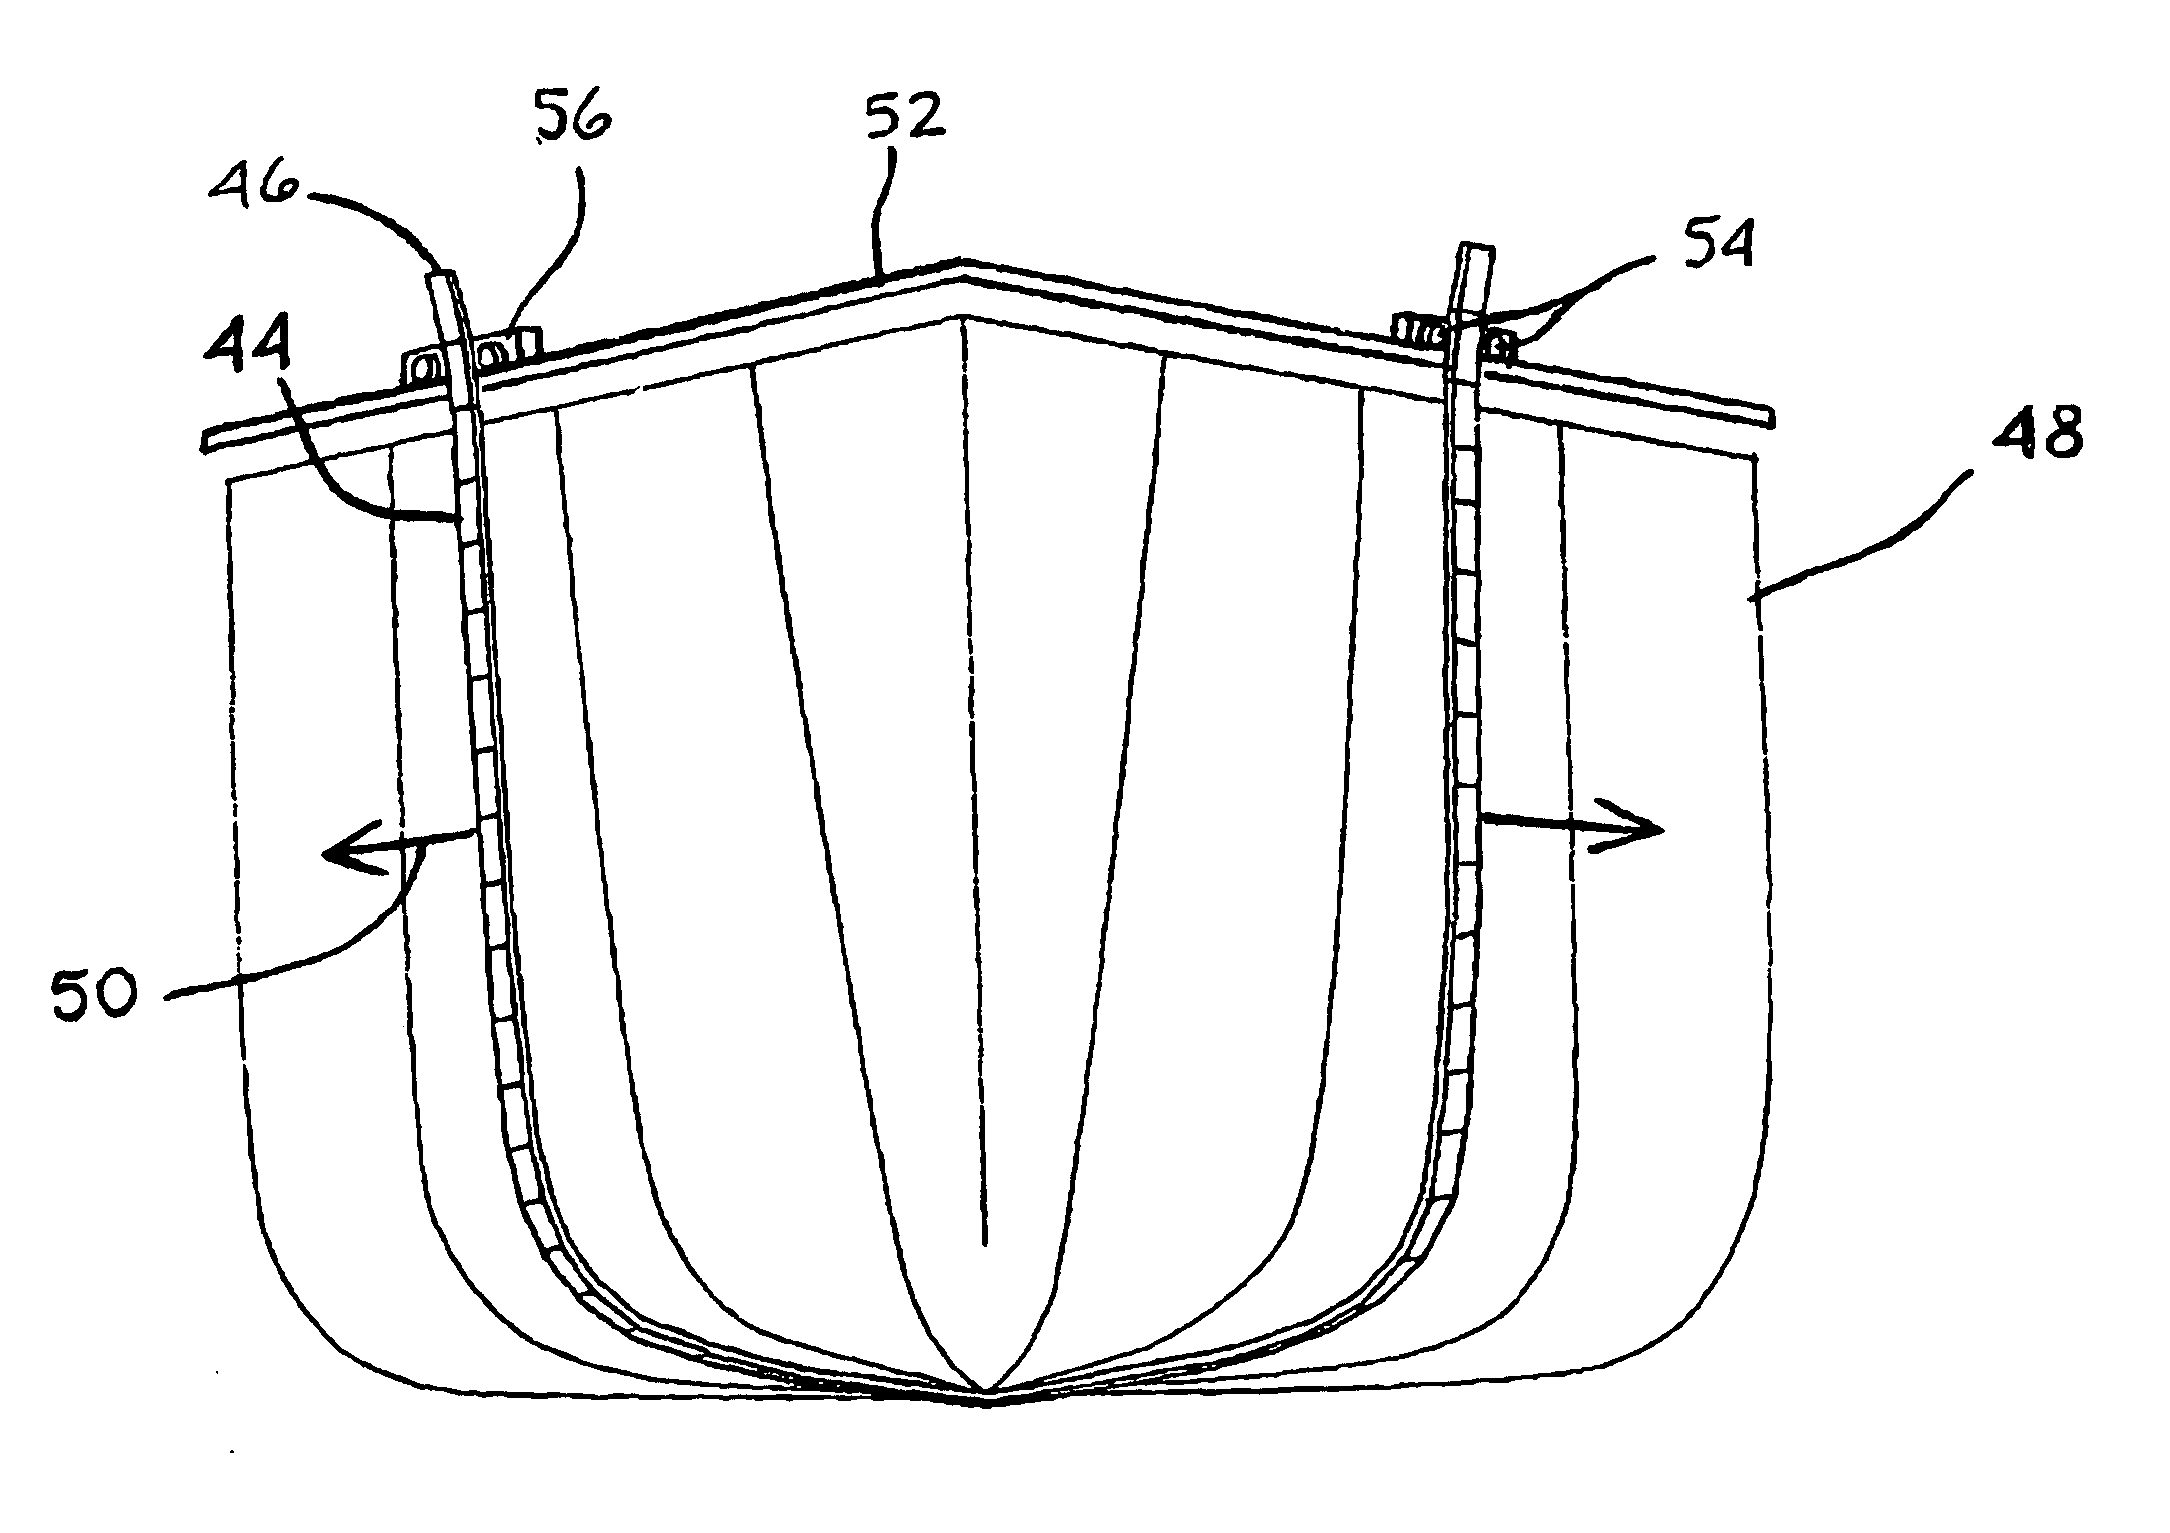 Skinned structures of air hardenable or liquid quench hardenable steel plate and methods of constructing thereof